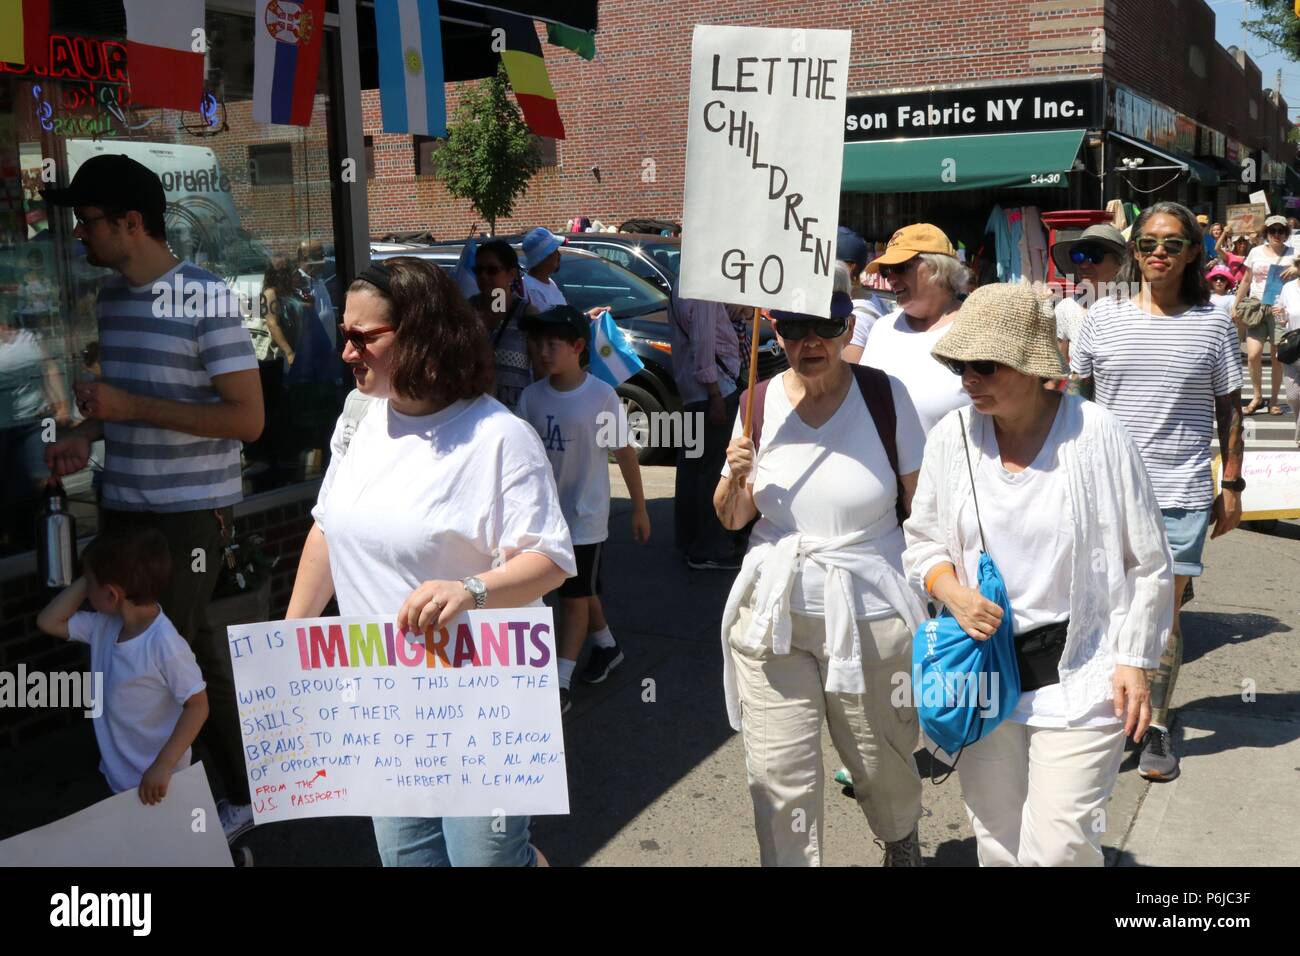 New York City, New York, USA. 30th June, 2018. The End Family Separation NYC Rally and March is one of several similar #FamiliesBelongTogether protest events taking place across the U.S. this weekend, 30th. June, 2018. This Queens, New York march and rally, took place in the most ethnically diverse neighborhood of the city in Jackson Heights and drew hundreds of passionate activist and protesters. Credit: G. Ronald Lopez/ZUMA Wire/Alamy Live News Stock Photo